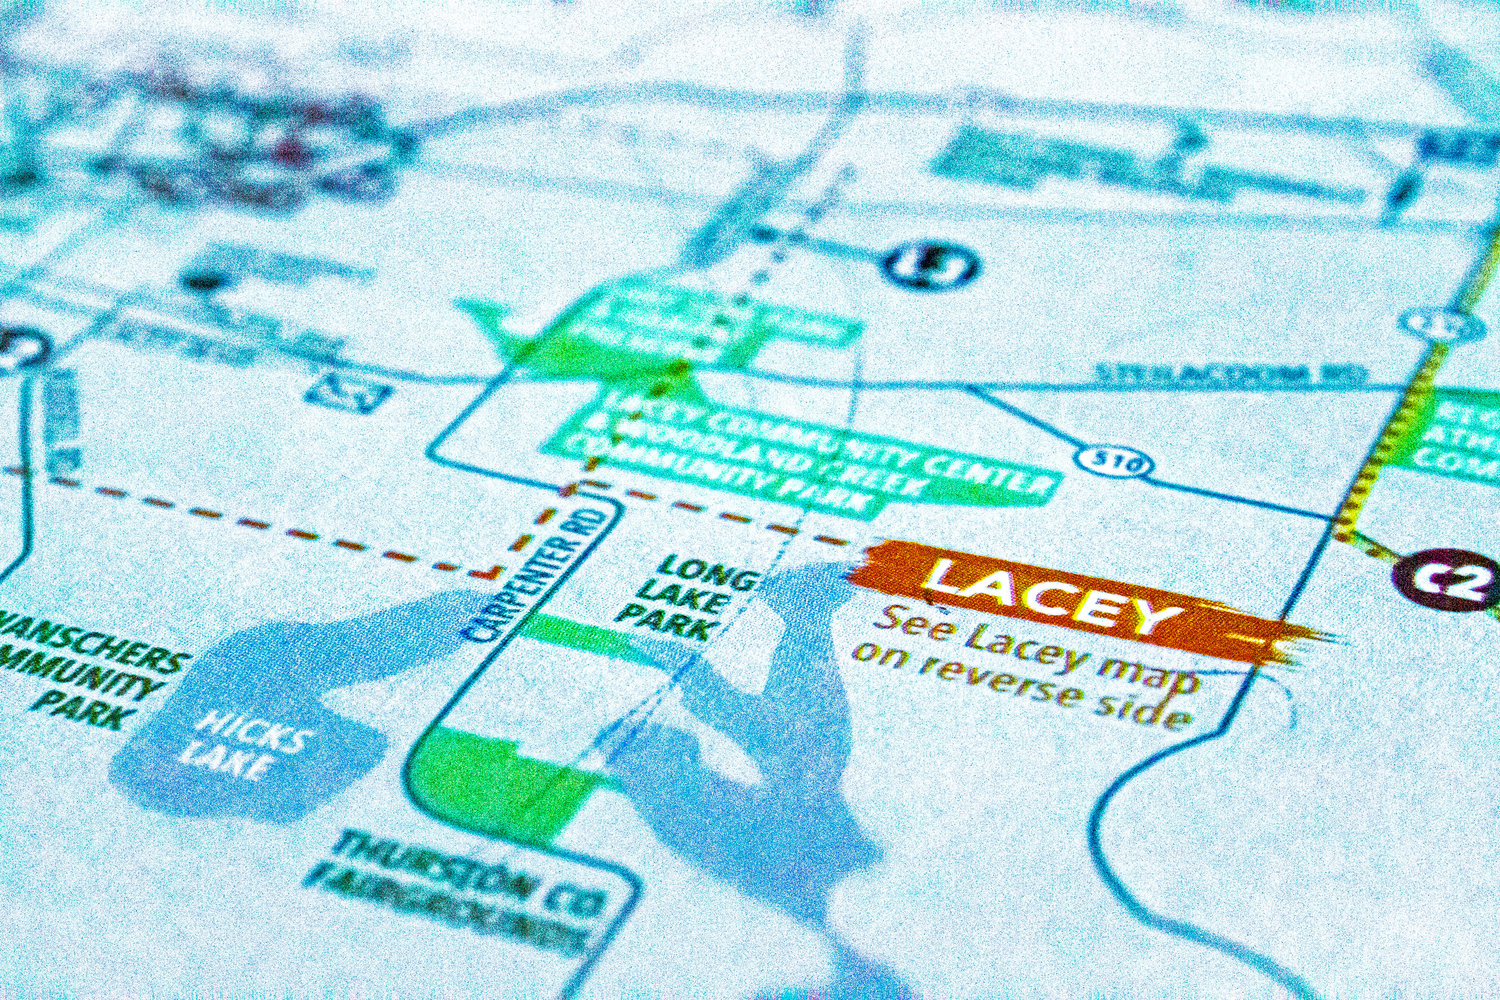 A map of the city of Lacey.